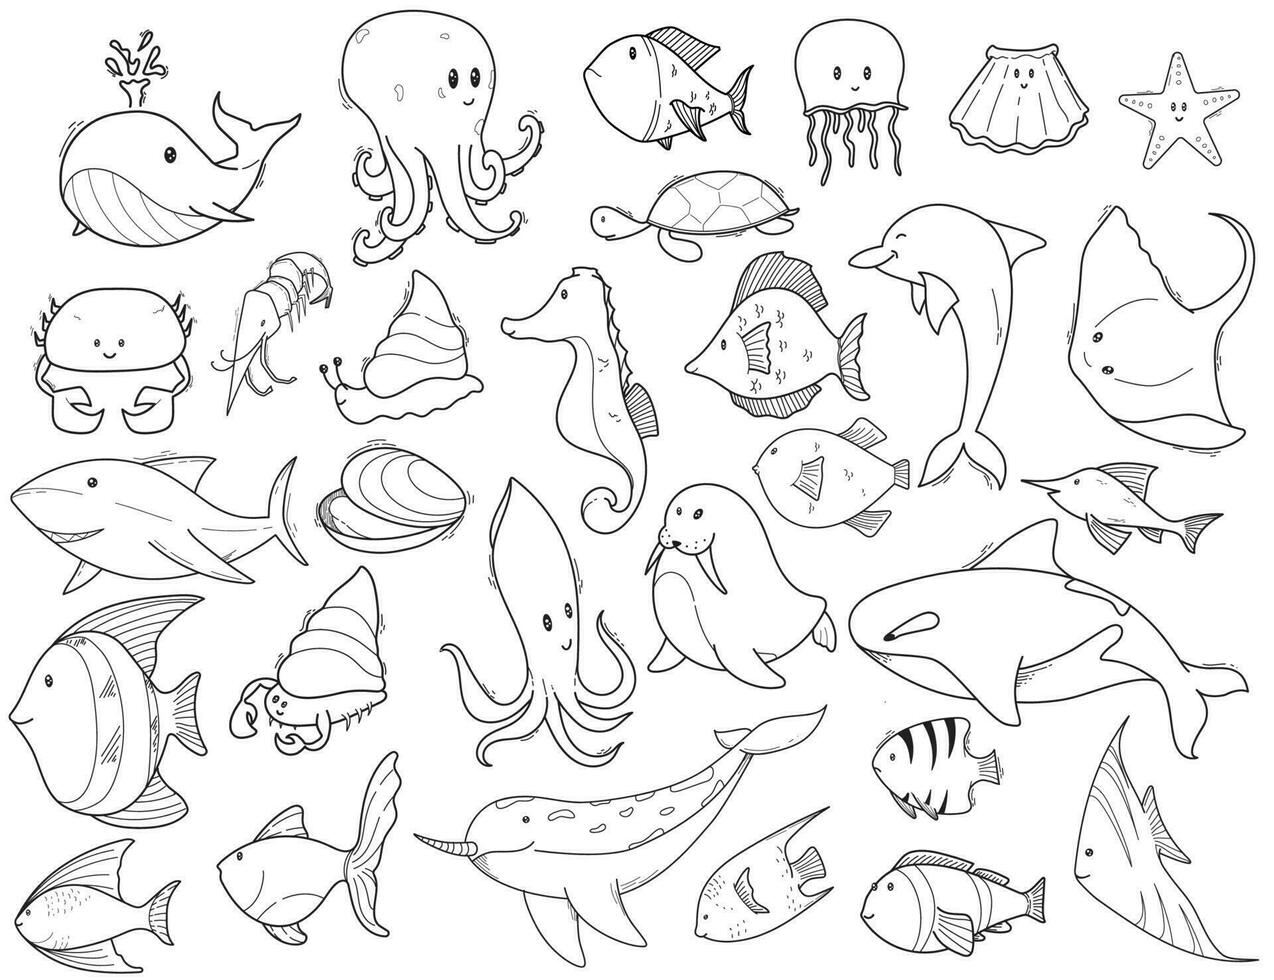 Set of hand-drawn doodle illustrations of animal undersea vector